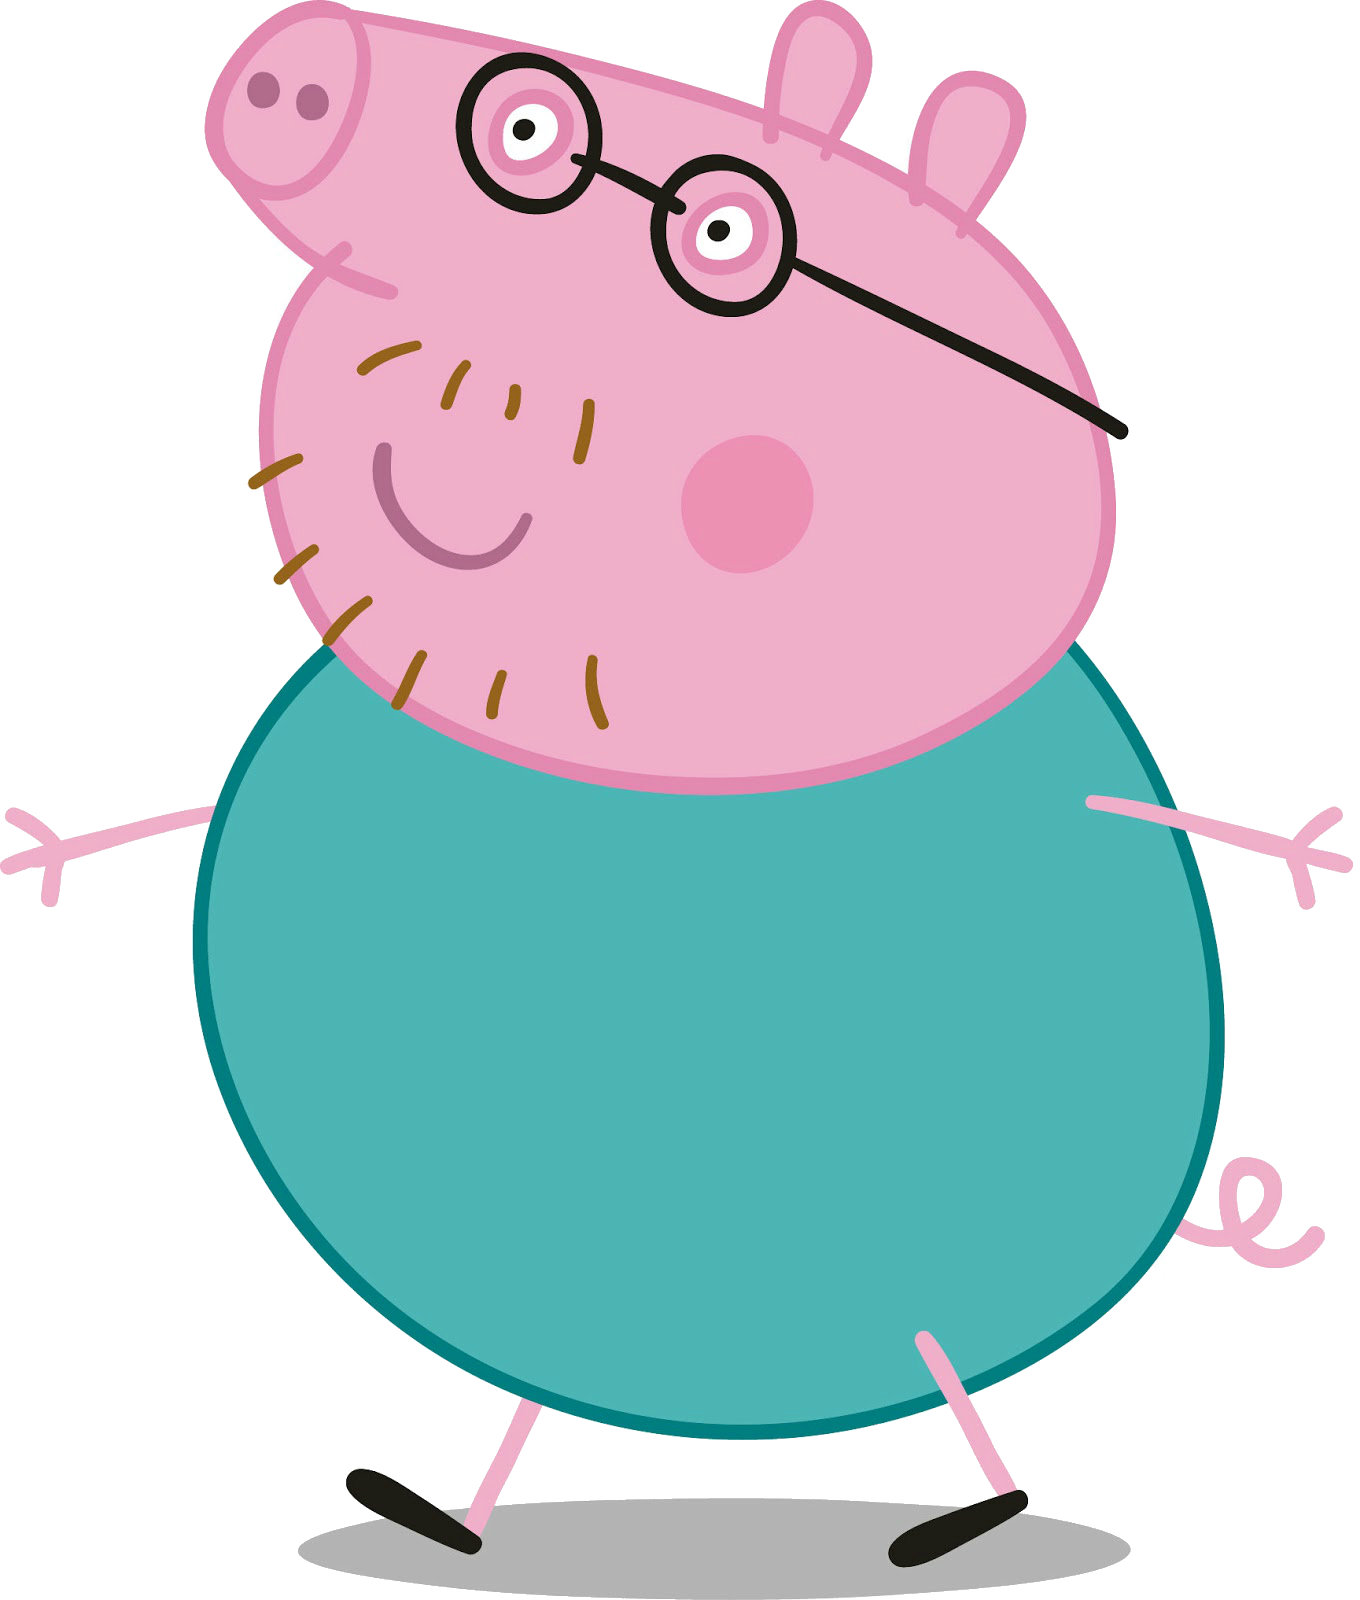 Pin by f tima. Family clipart pig